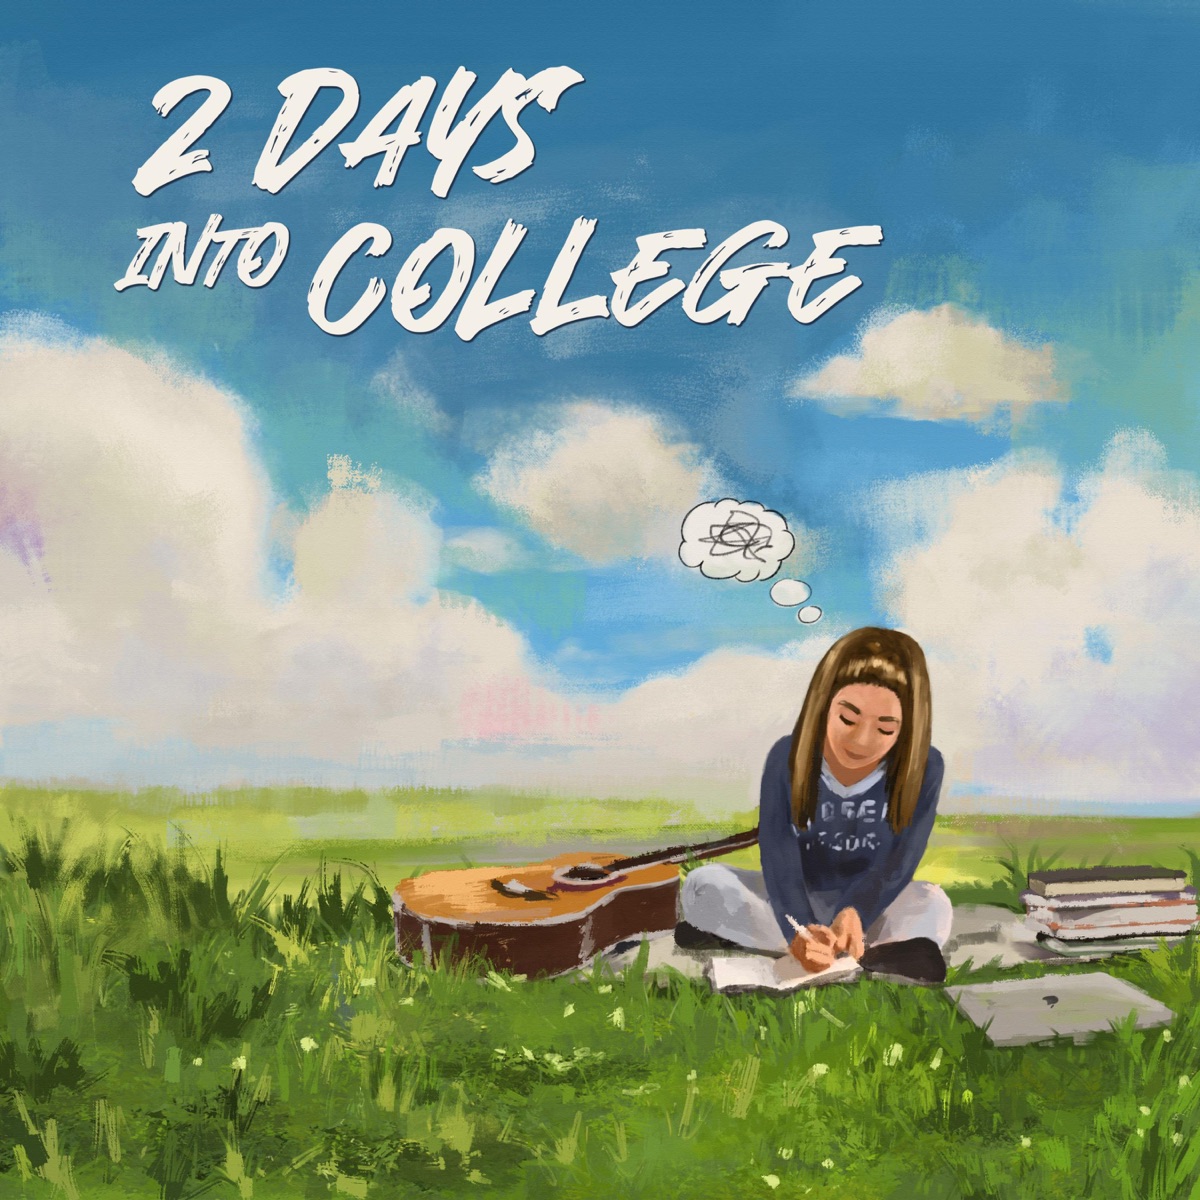 Aimee+Cartys+2+Day+Into+College+Spotify+watercolor+song+cover.++